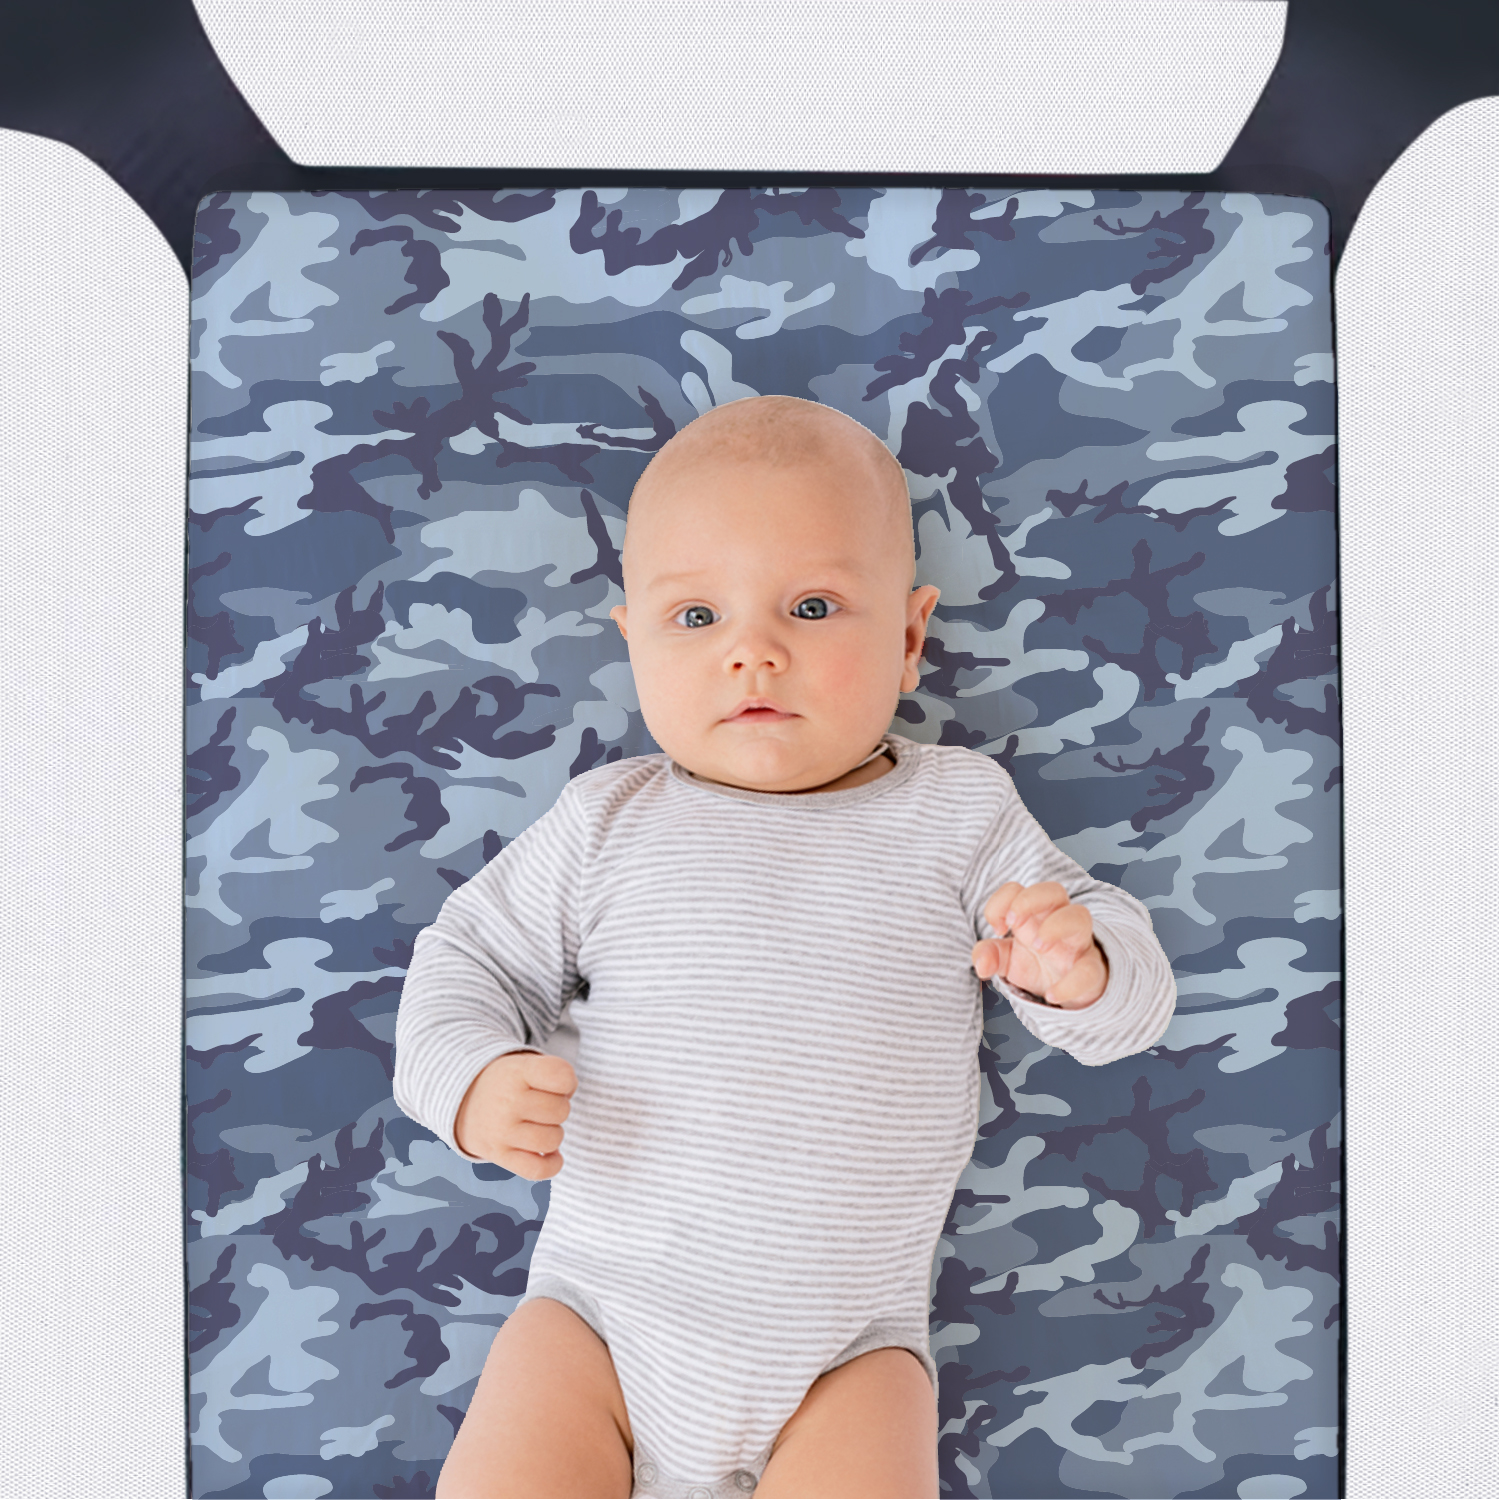 The Peanutshell Pack n Play, Mini Crib, Portable Crib or Fitted Playard Sheets for Baby Boys, 2 Pack Set, Blue and Grey Camo - image 2 of 4